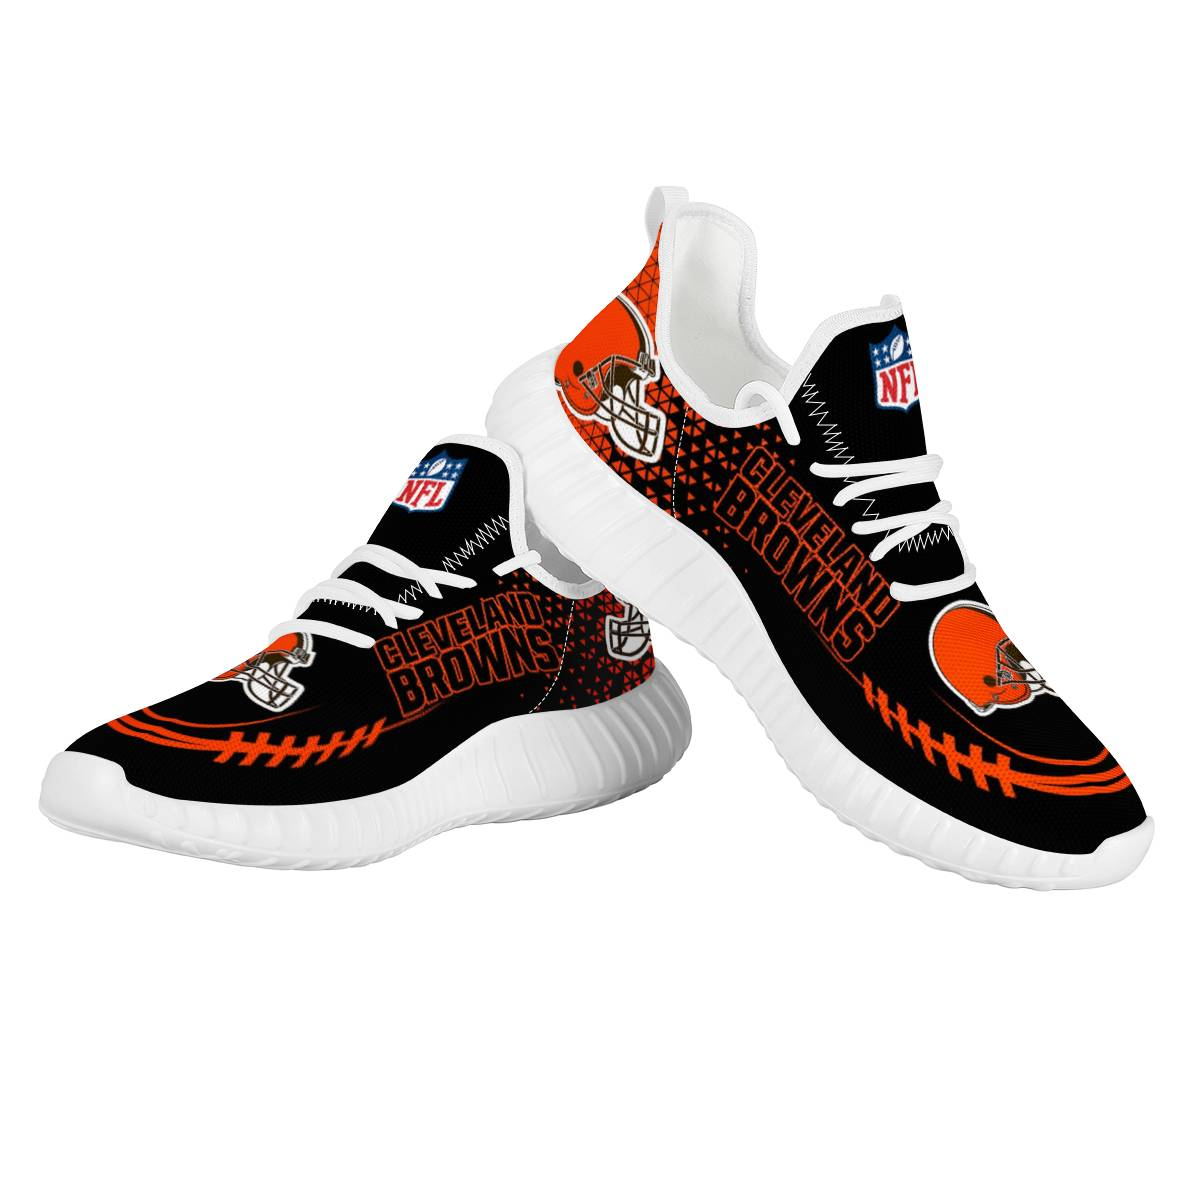 Men's Cleveland Browns Mesh Knit Sneakers/Shoes 004